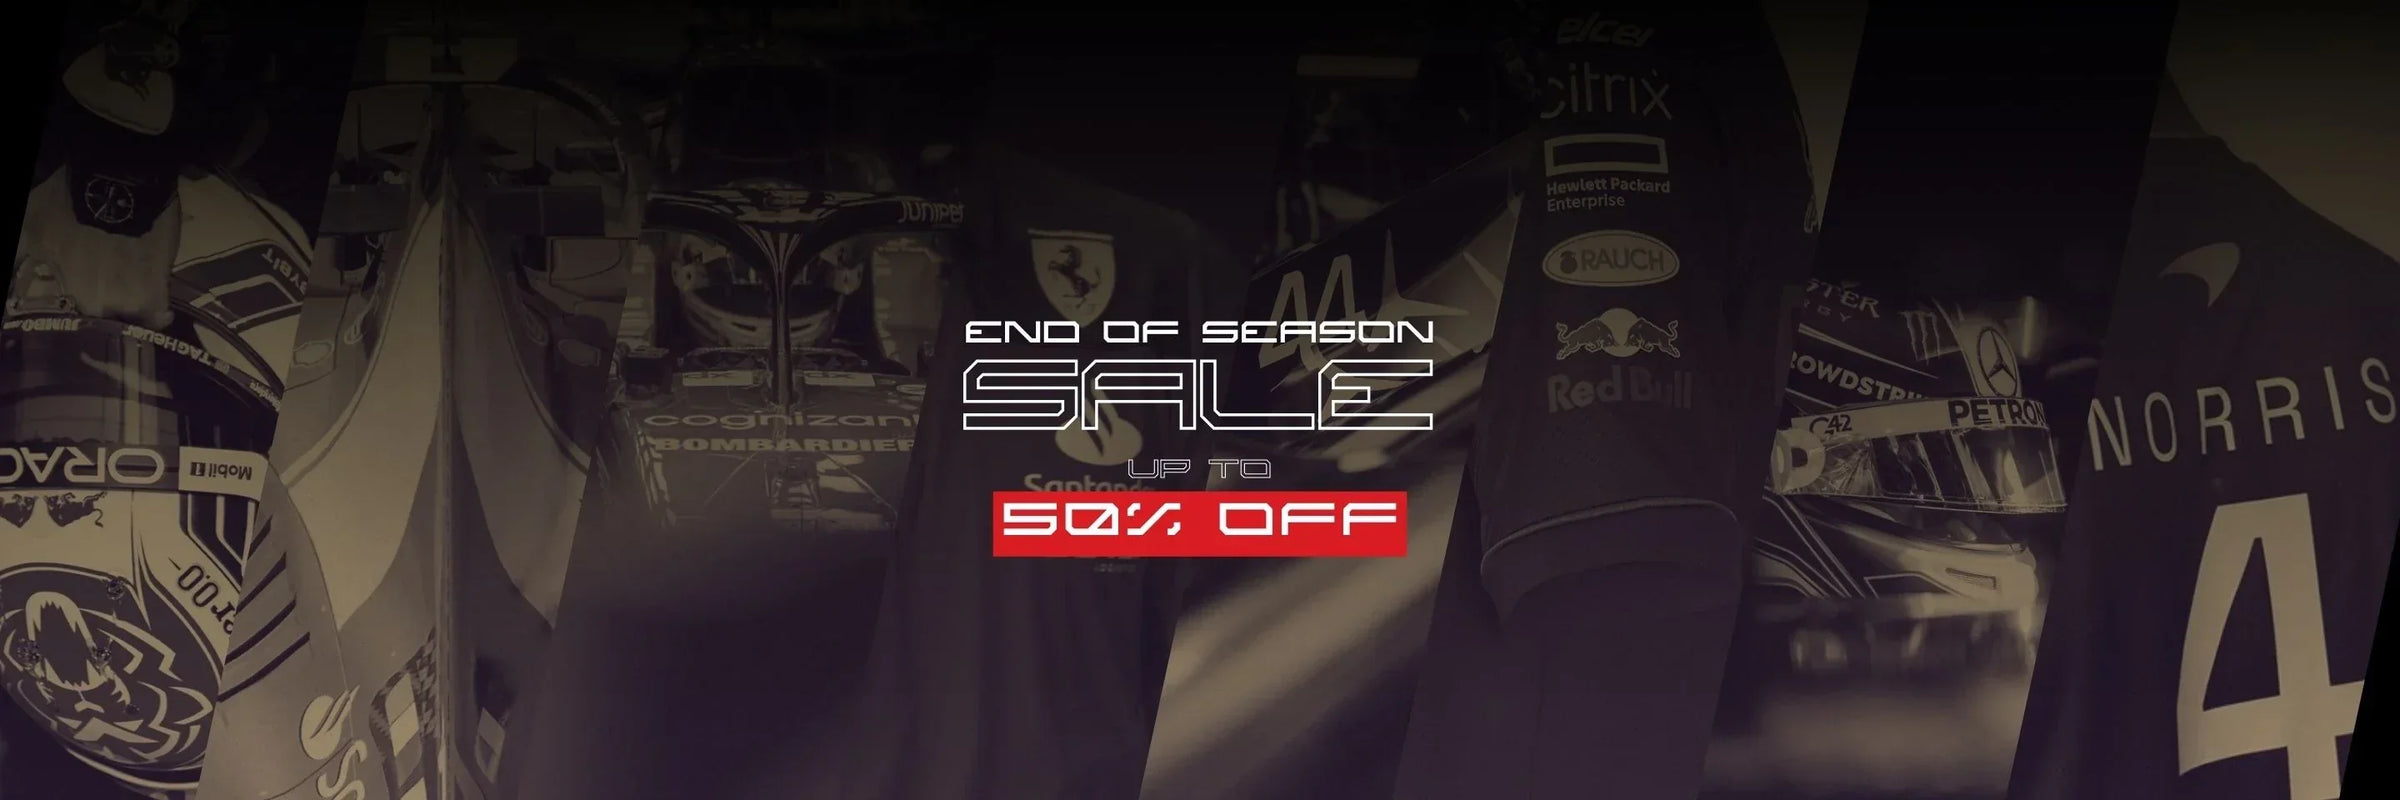 SALE - F1 and Motorpsort Offficial Merchandise - Fueler store